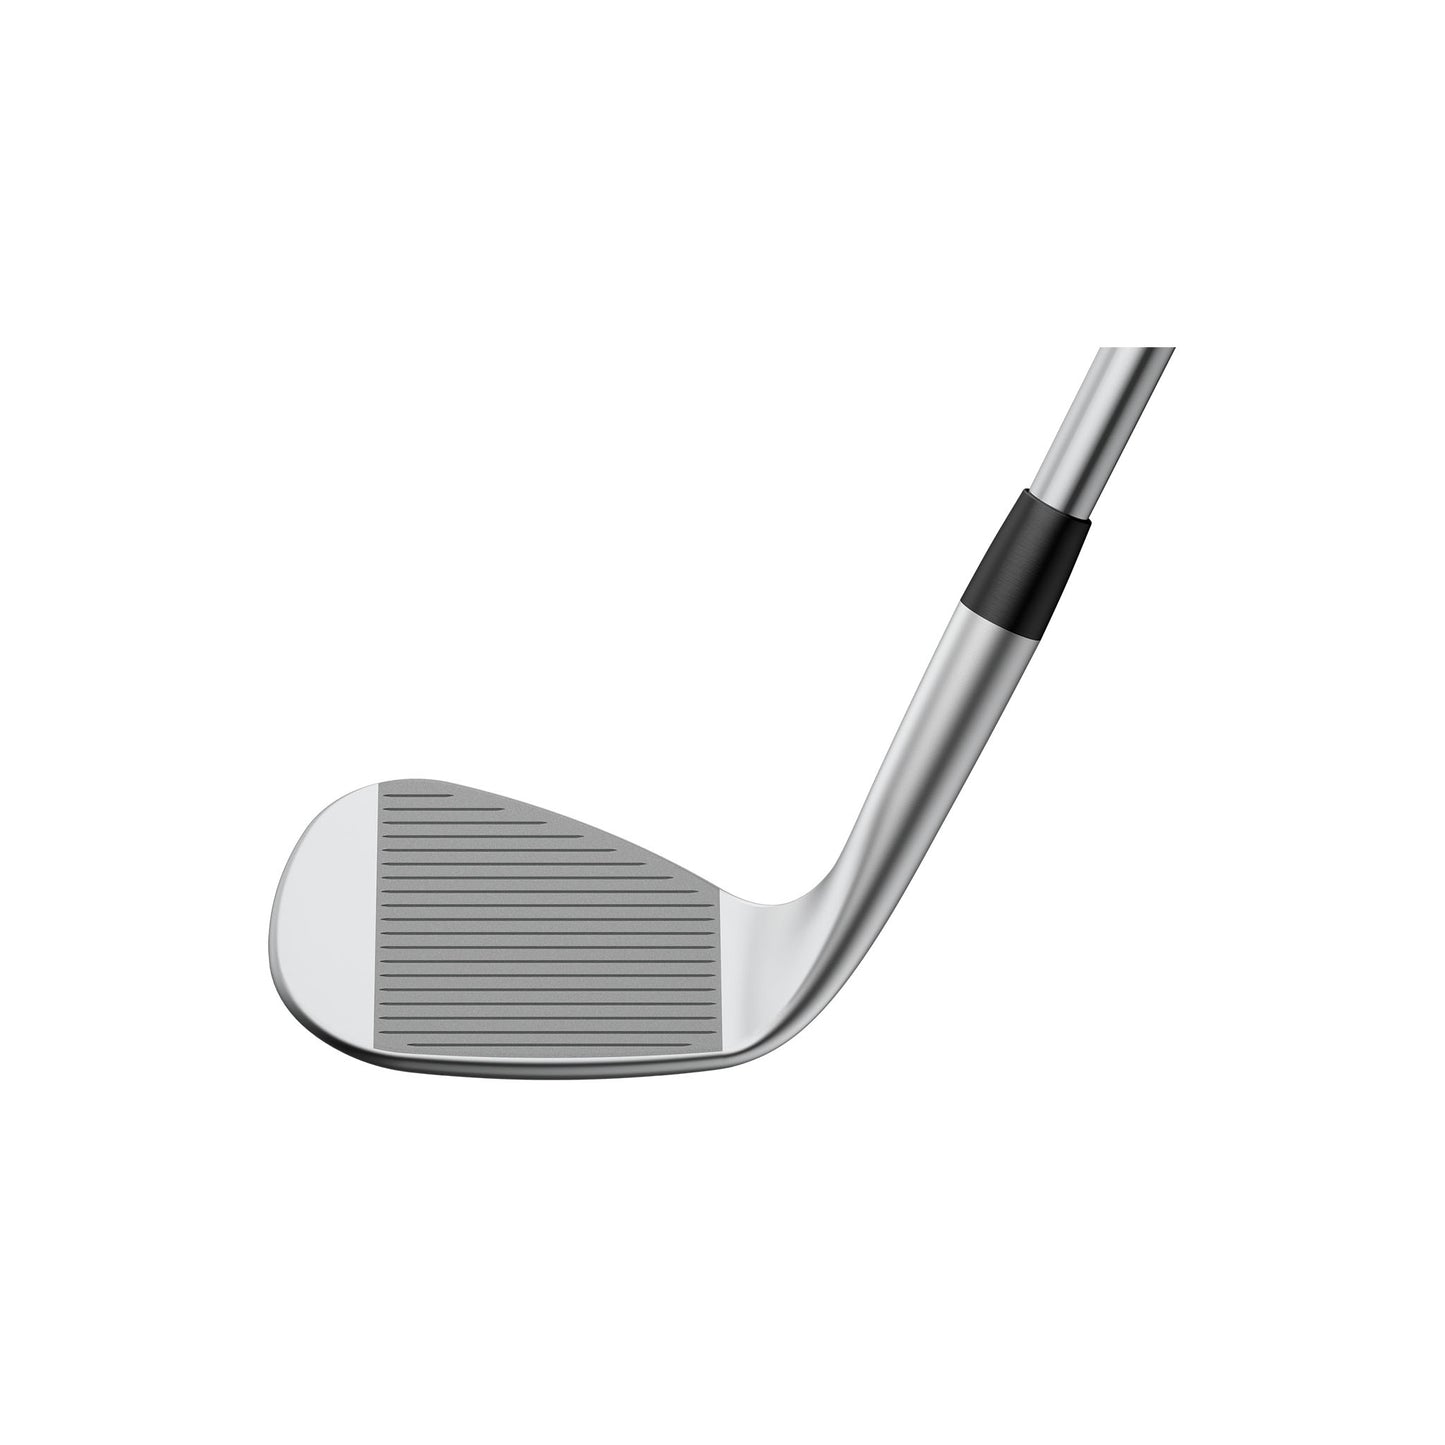 Ping Glide 4.0